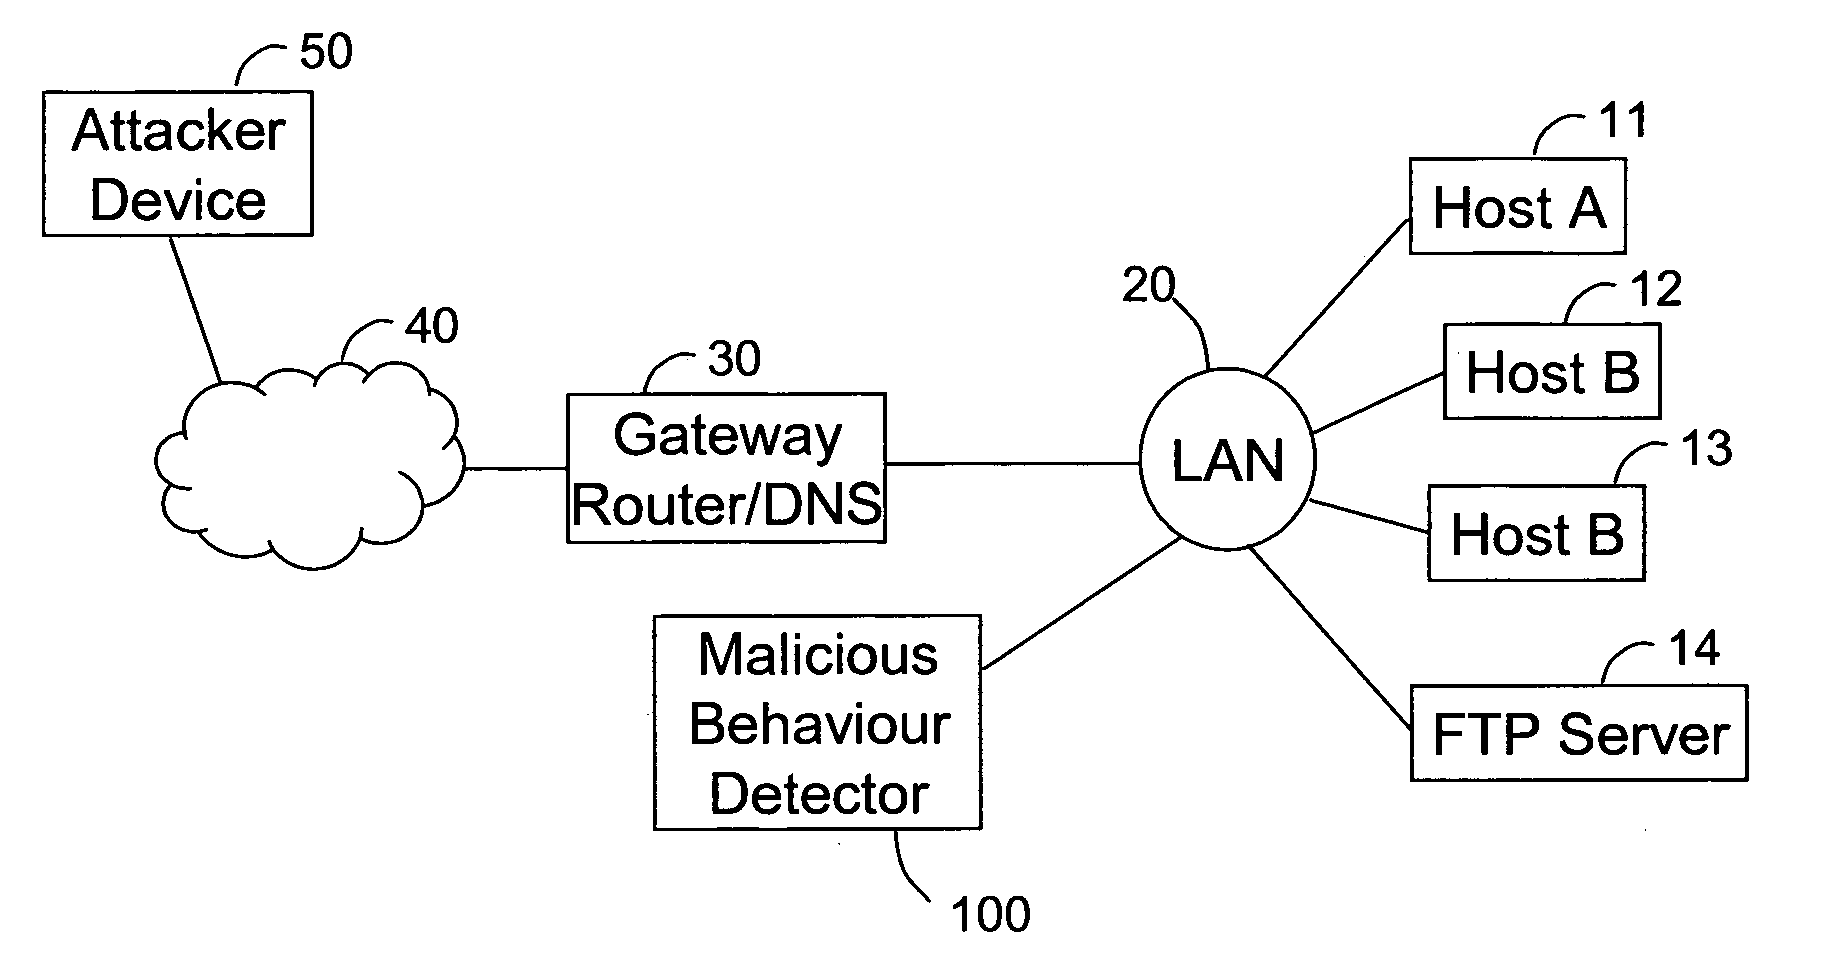 Detecting malicious behaviour on a computer network